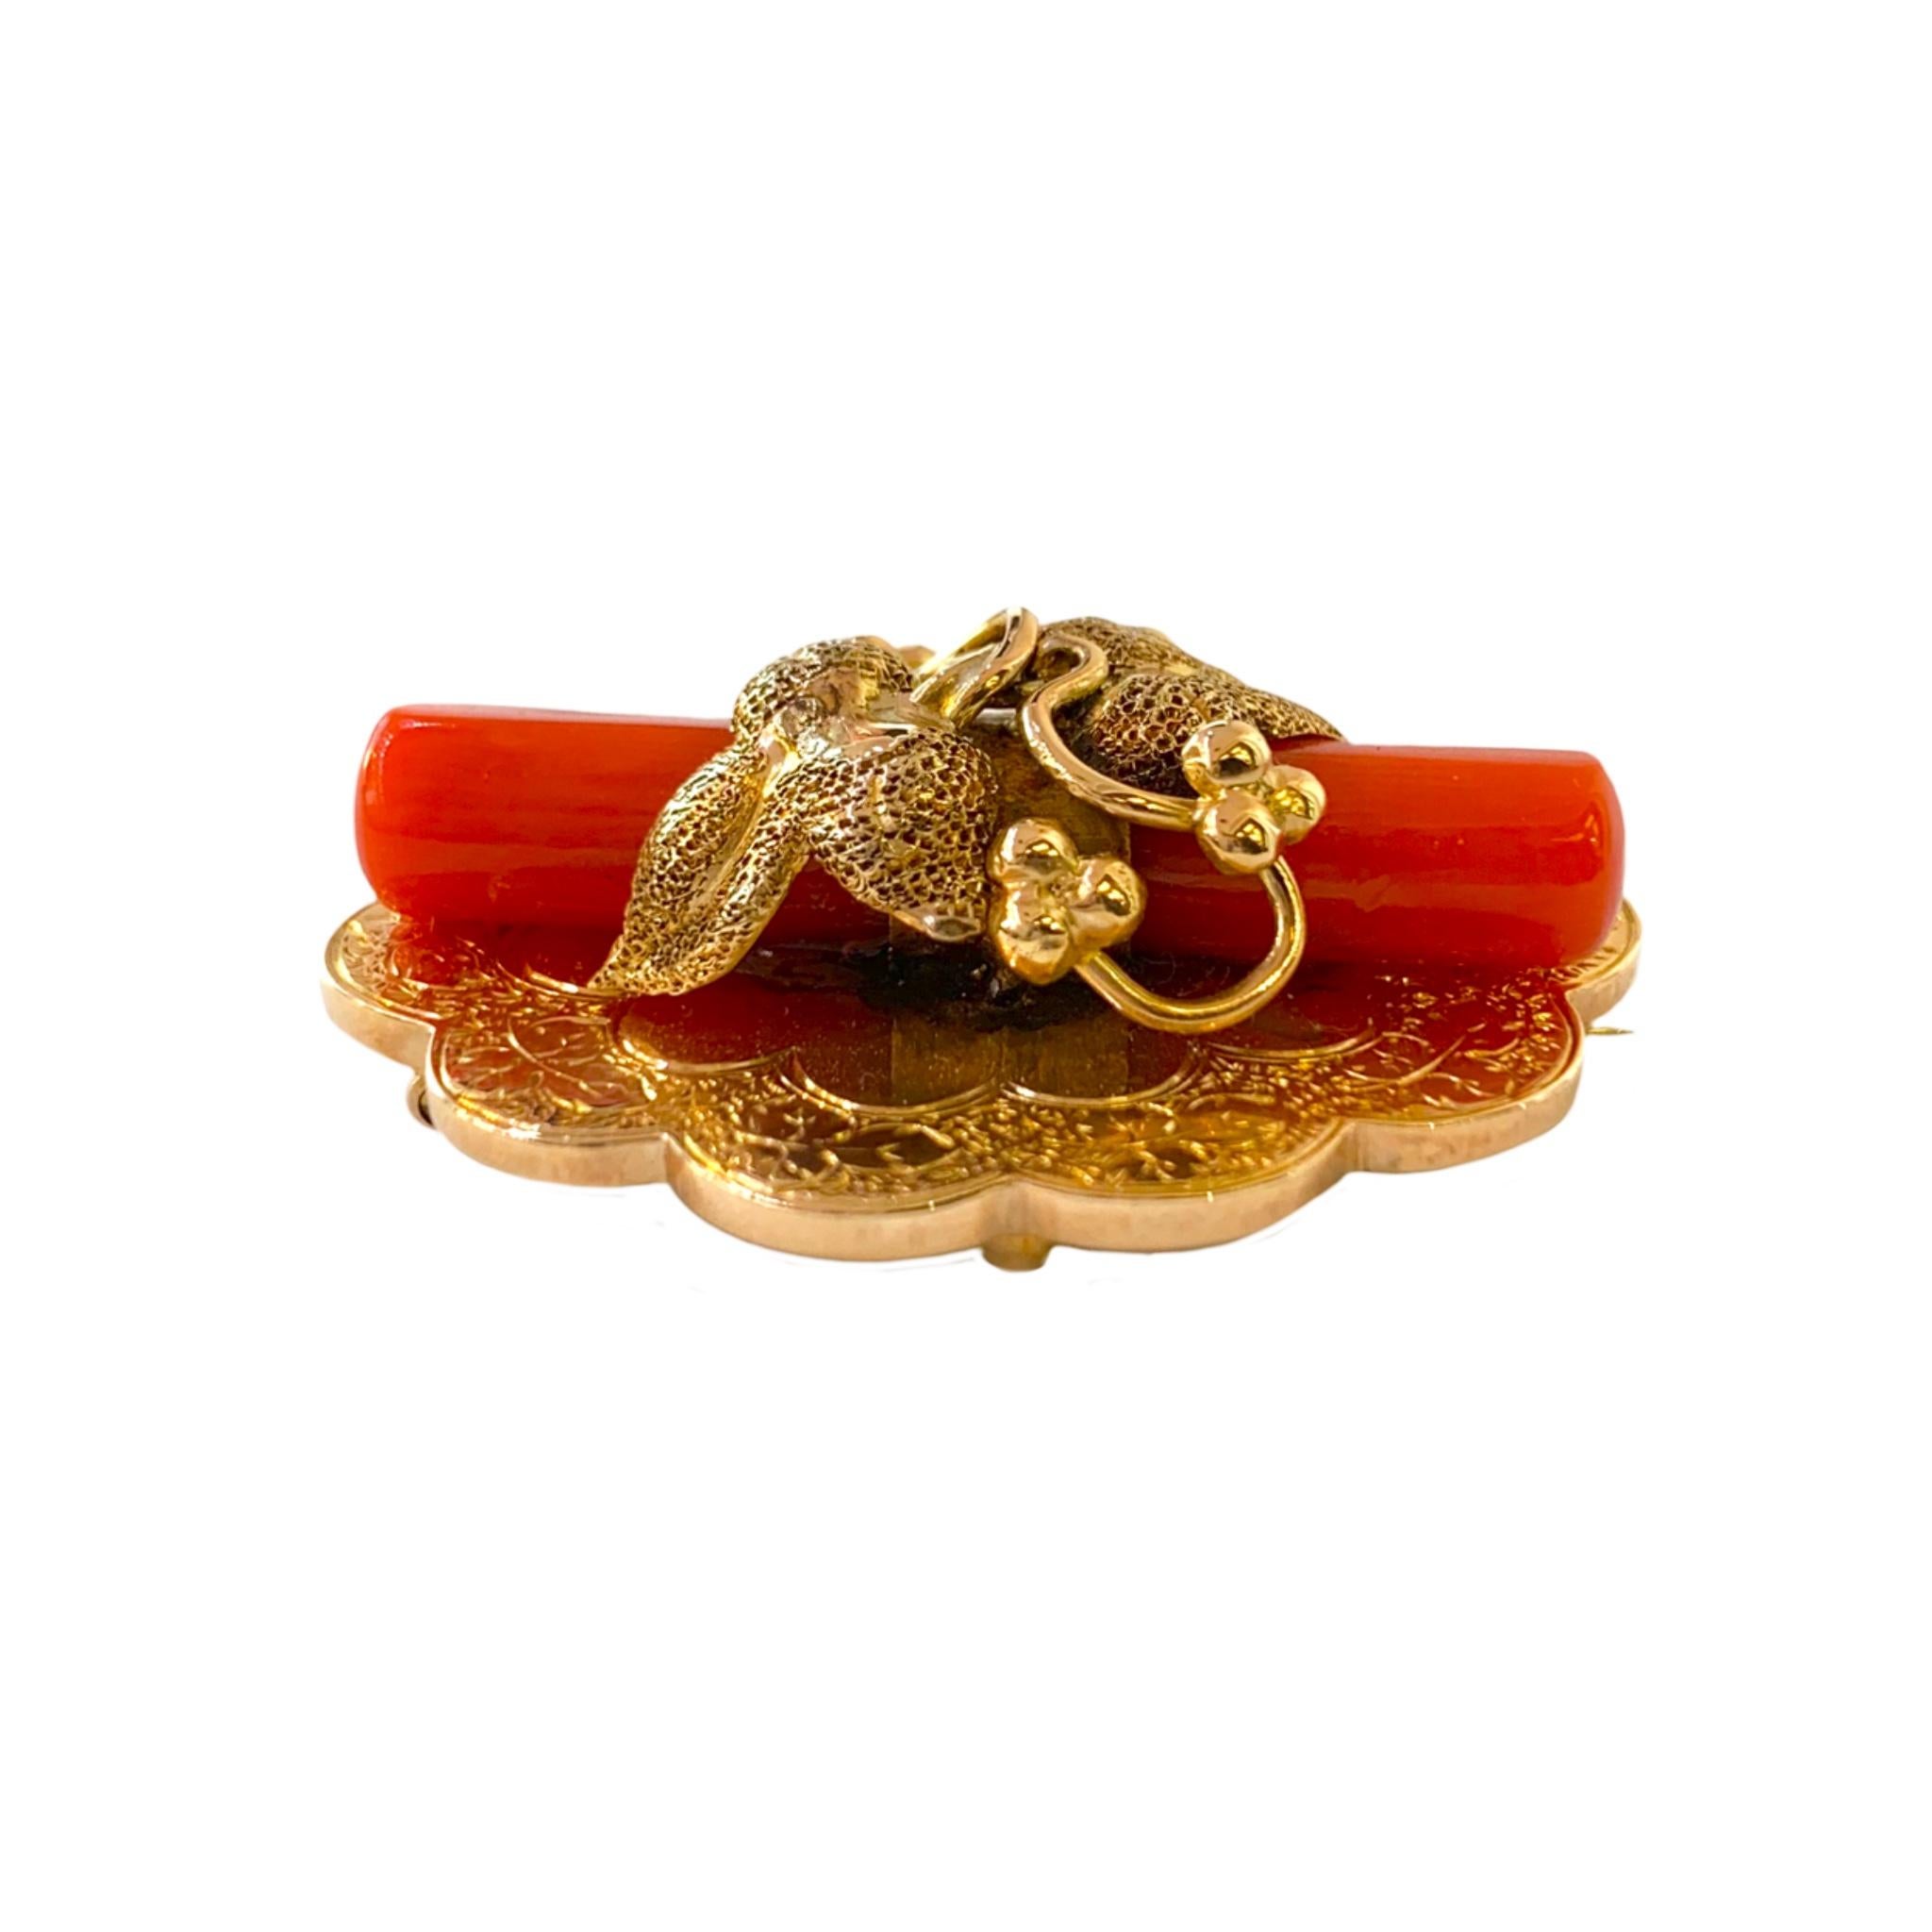 This beautiful Victorian cylindrical orange coral is nestled in the 14 karat yellow gold vintage floral design that can be worn as a pendant or brooch.